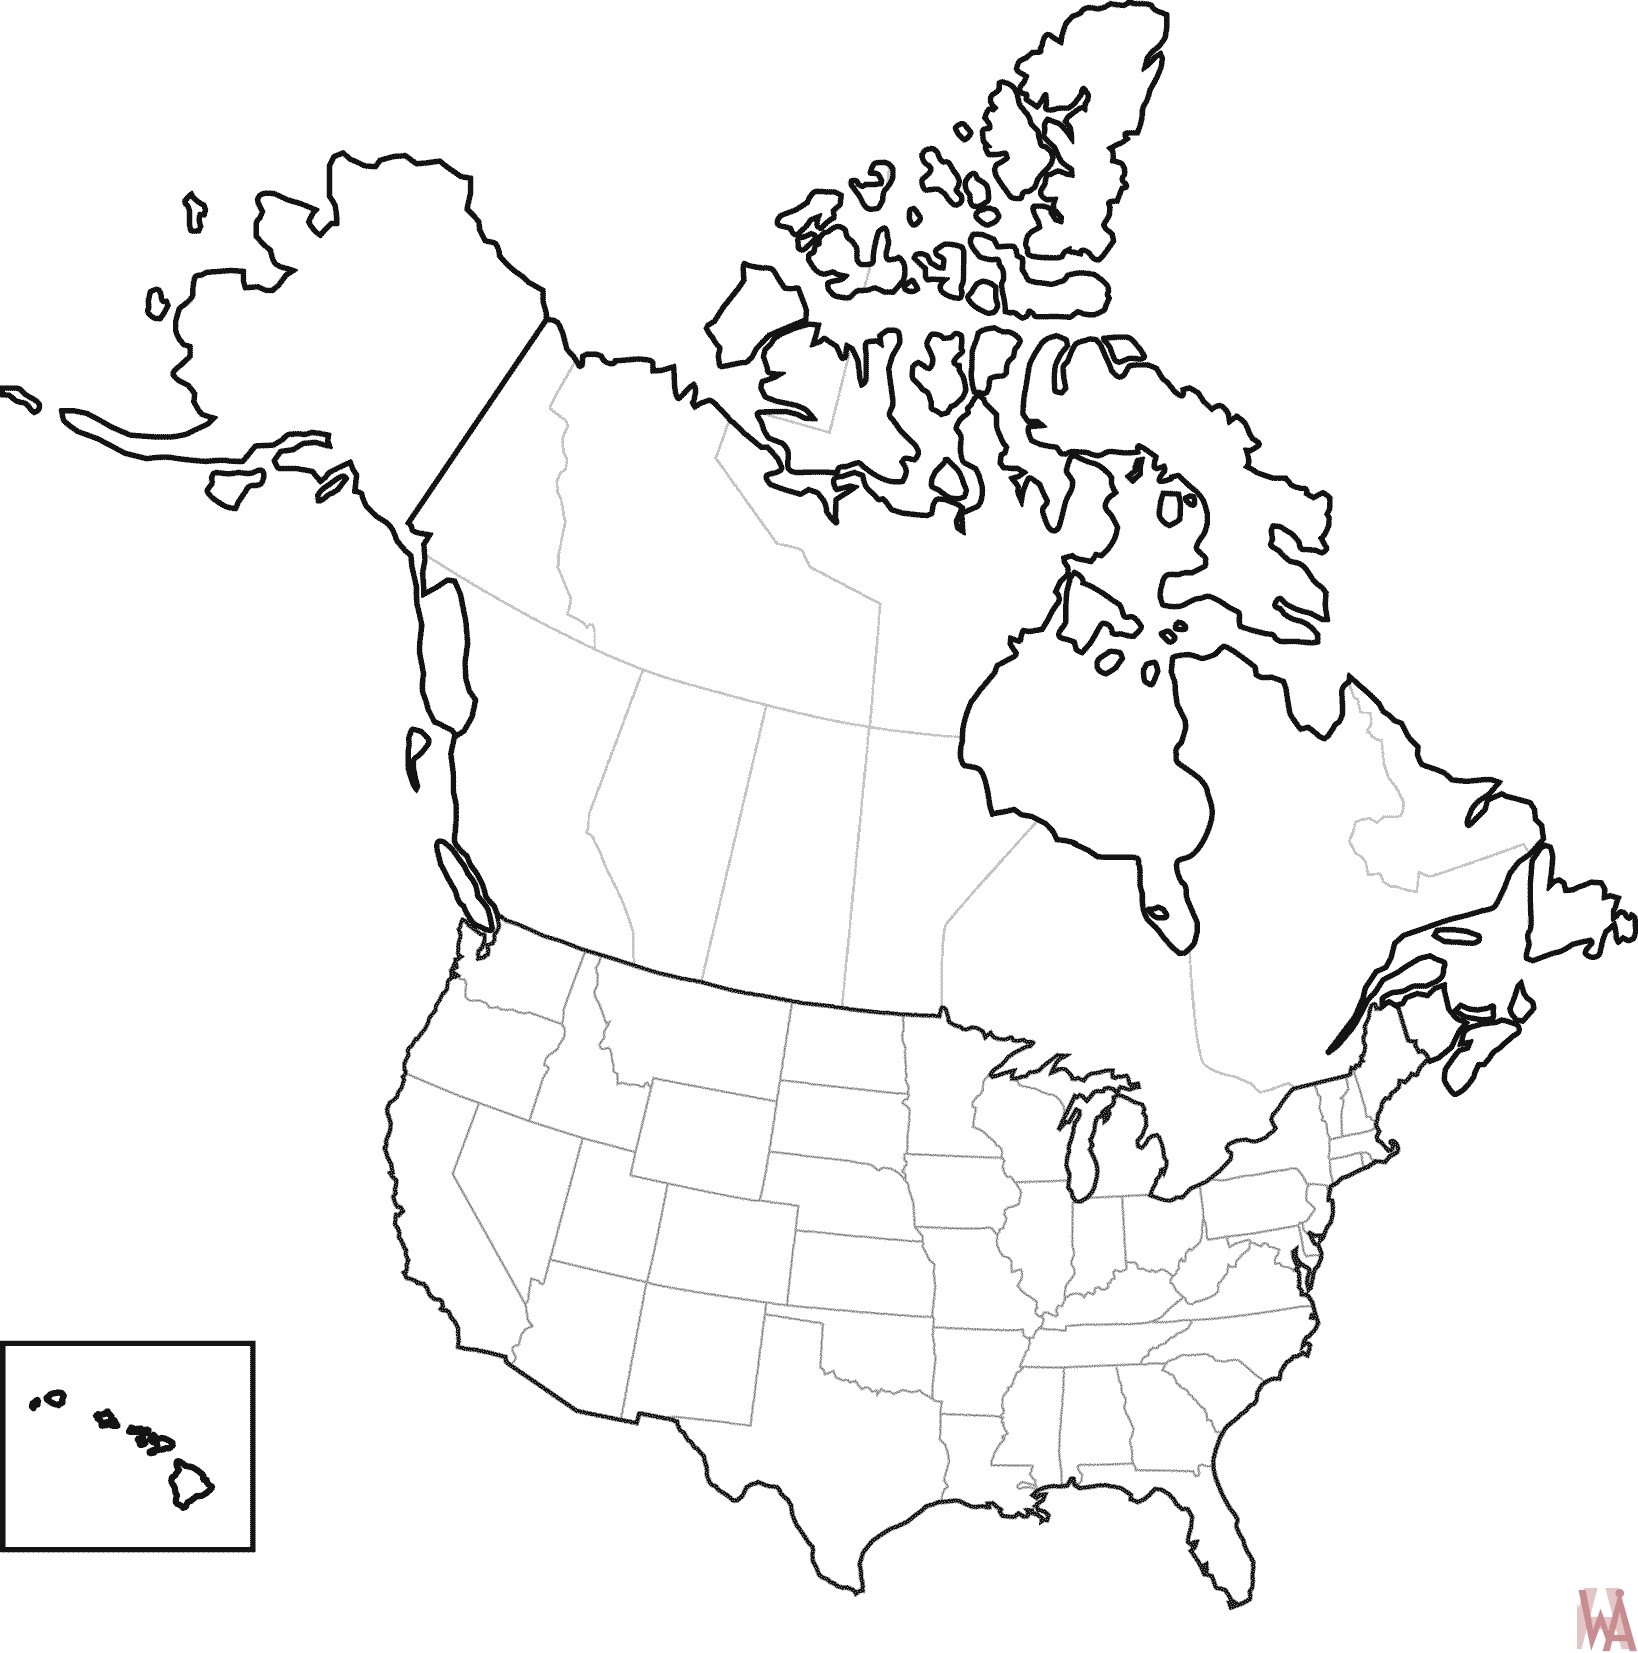 blank map of the us and canada Blank Outline Map Of The United States And Canada Whatsanswer blank map of the us and canada